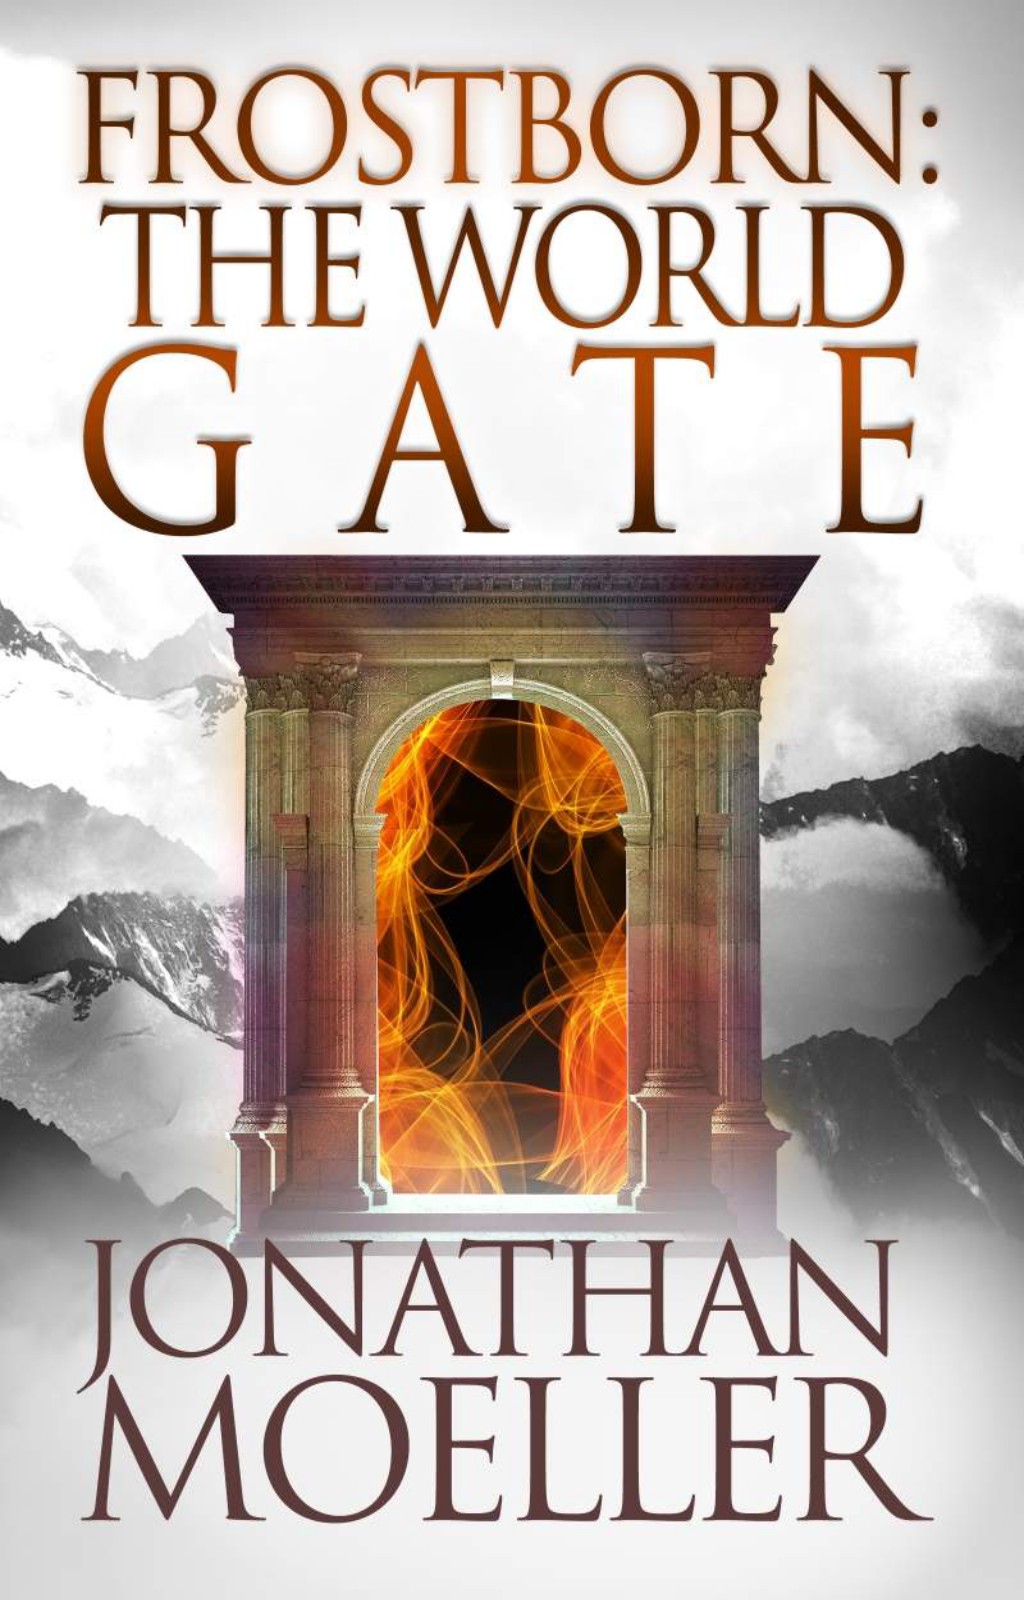 Frostborn: The World Gate